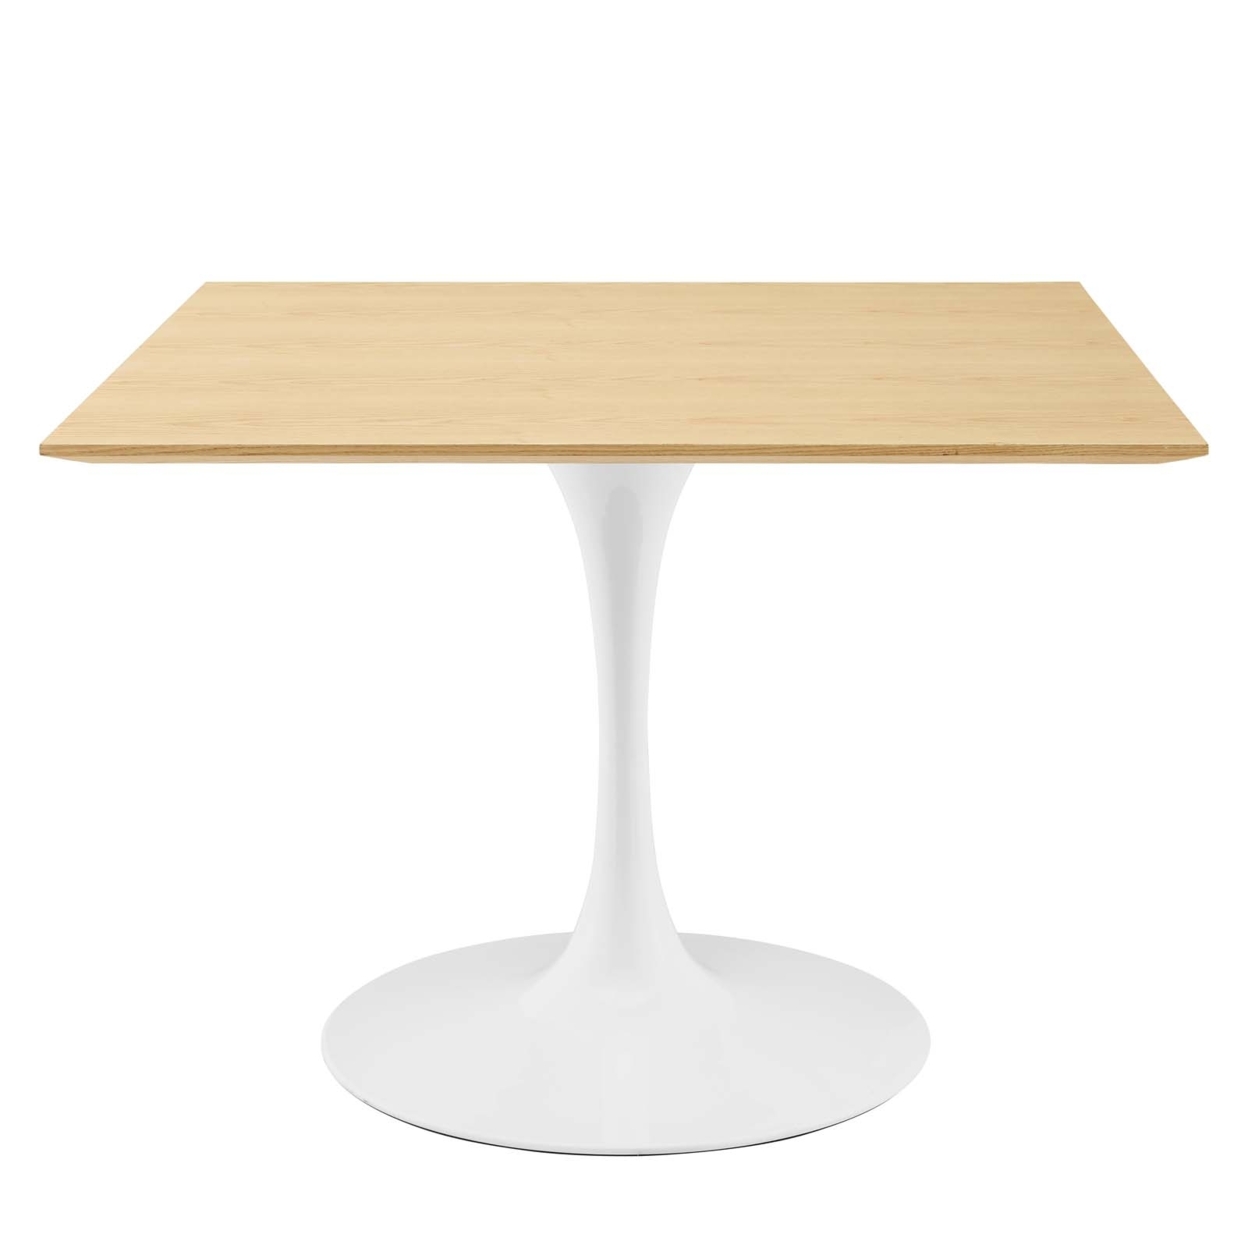 Lippa 40 Square Dining Table, White Natural